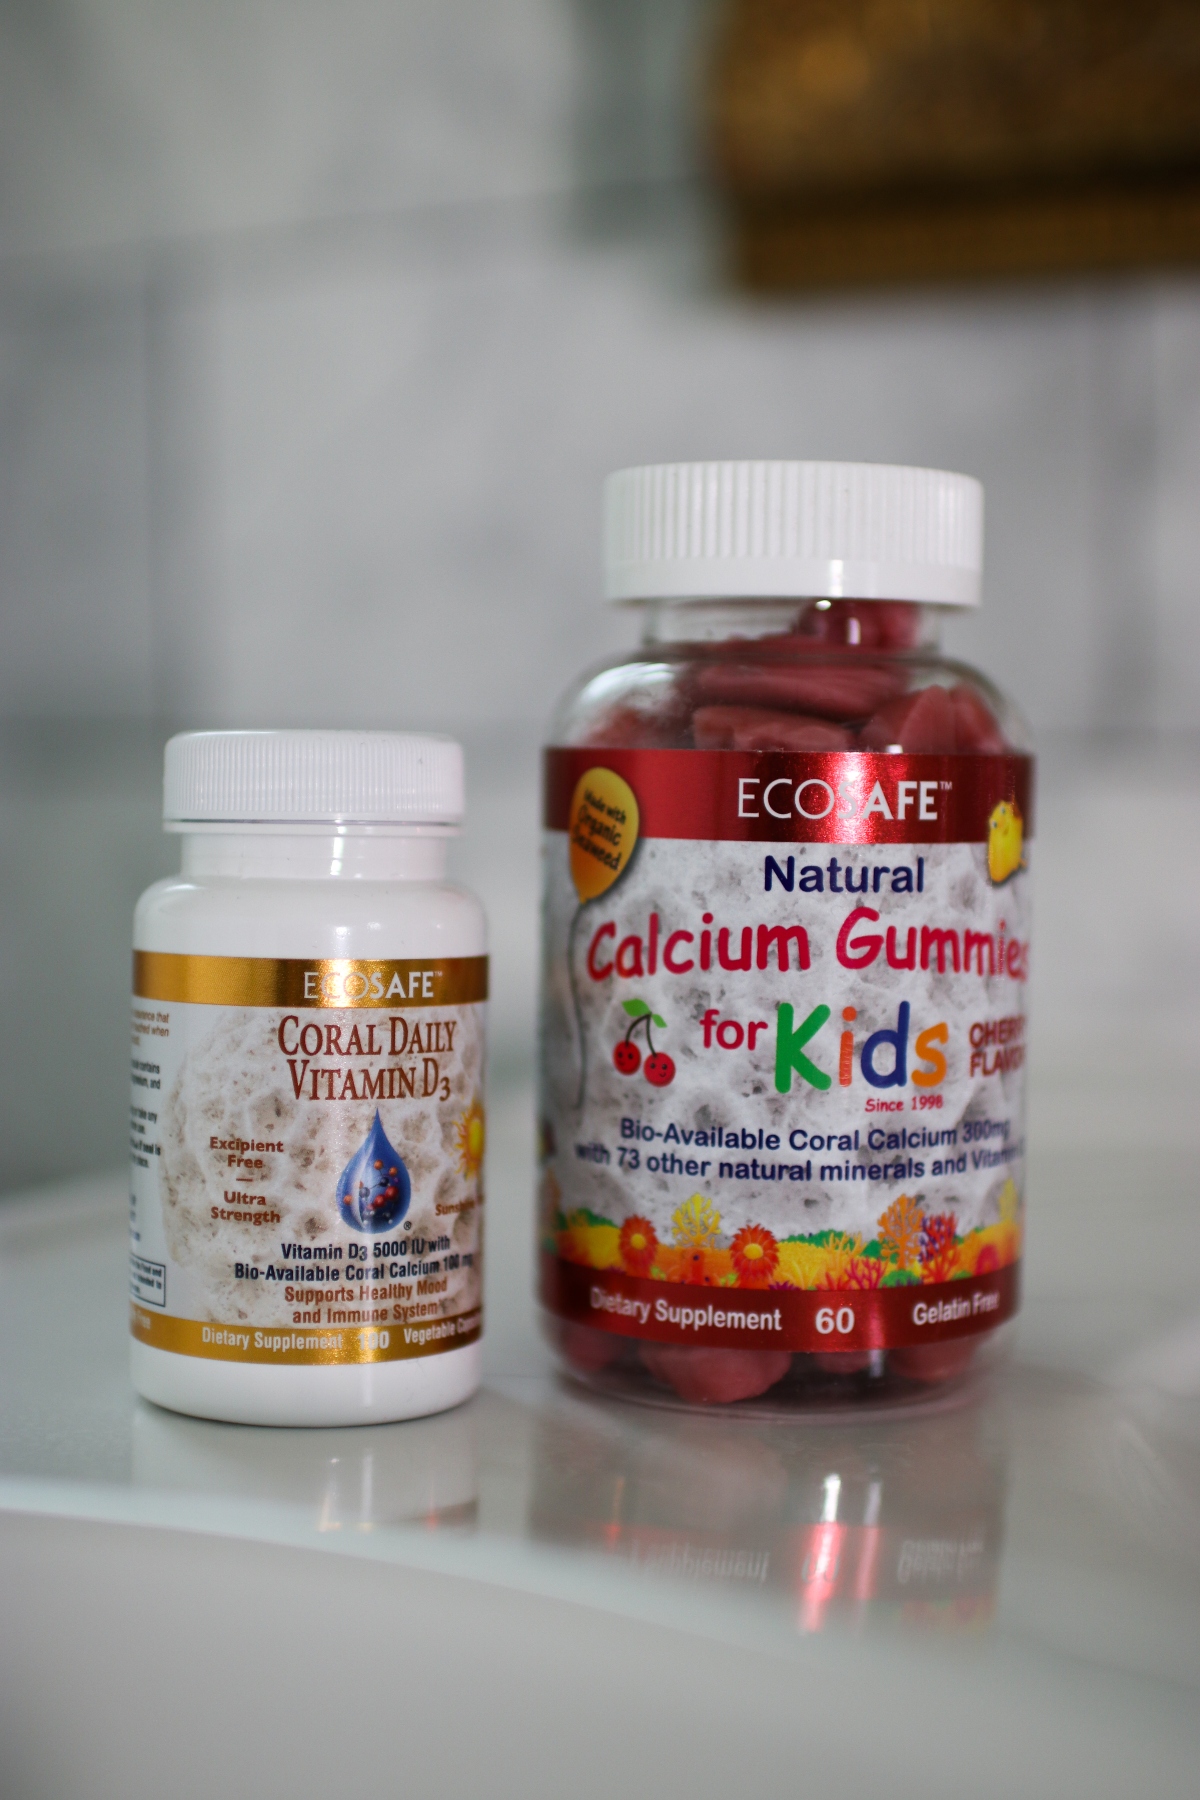 Coral Daily Vitamin D3 Vitamins and ECOSAFE Natural Calcium Gummies for Kids